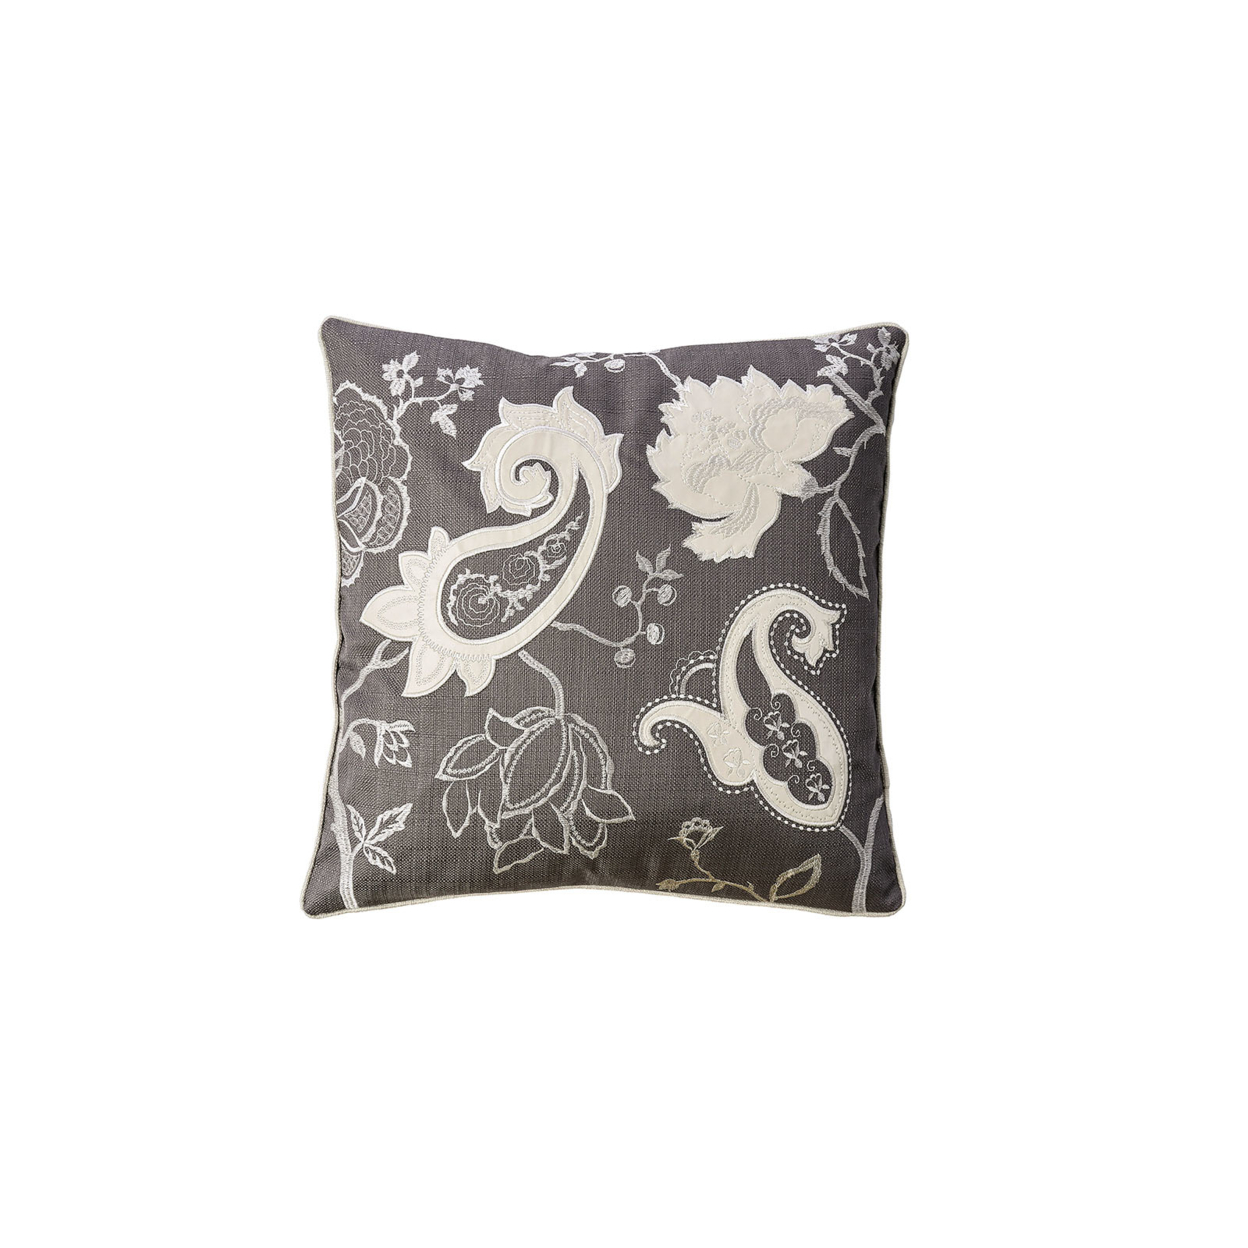 Contemporary Style Set Of 2 Throw Pillows With Paisley And Floral Designing- Saltoro Sherpi